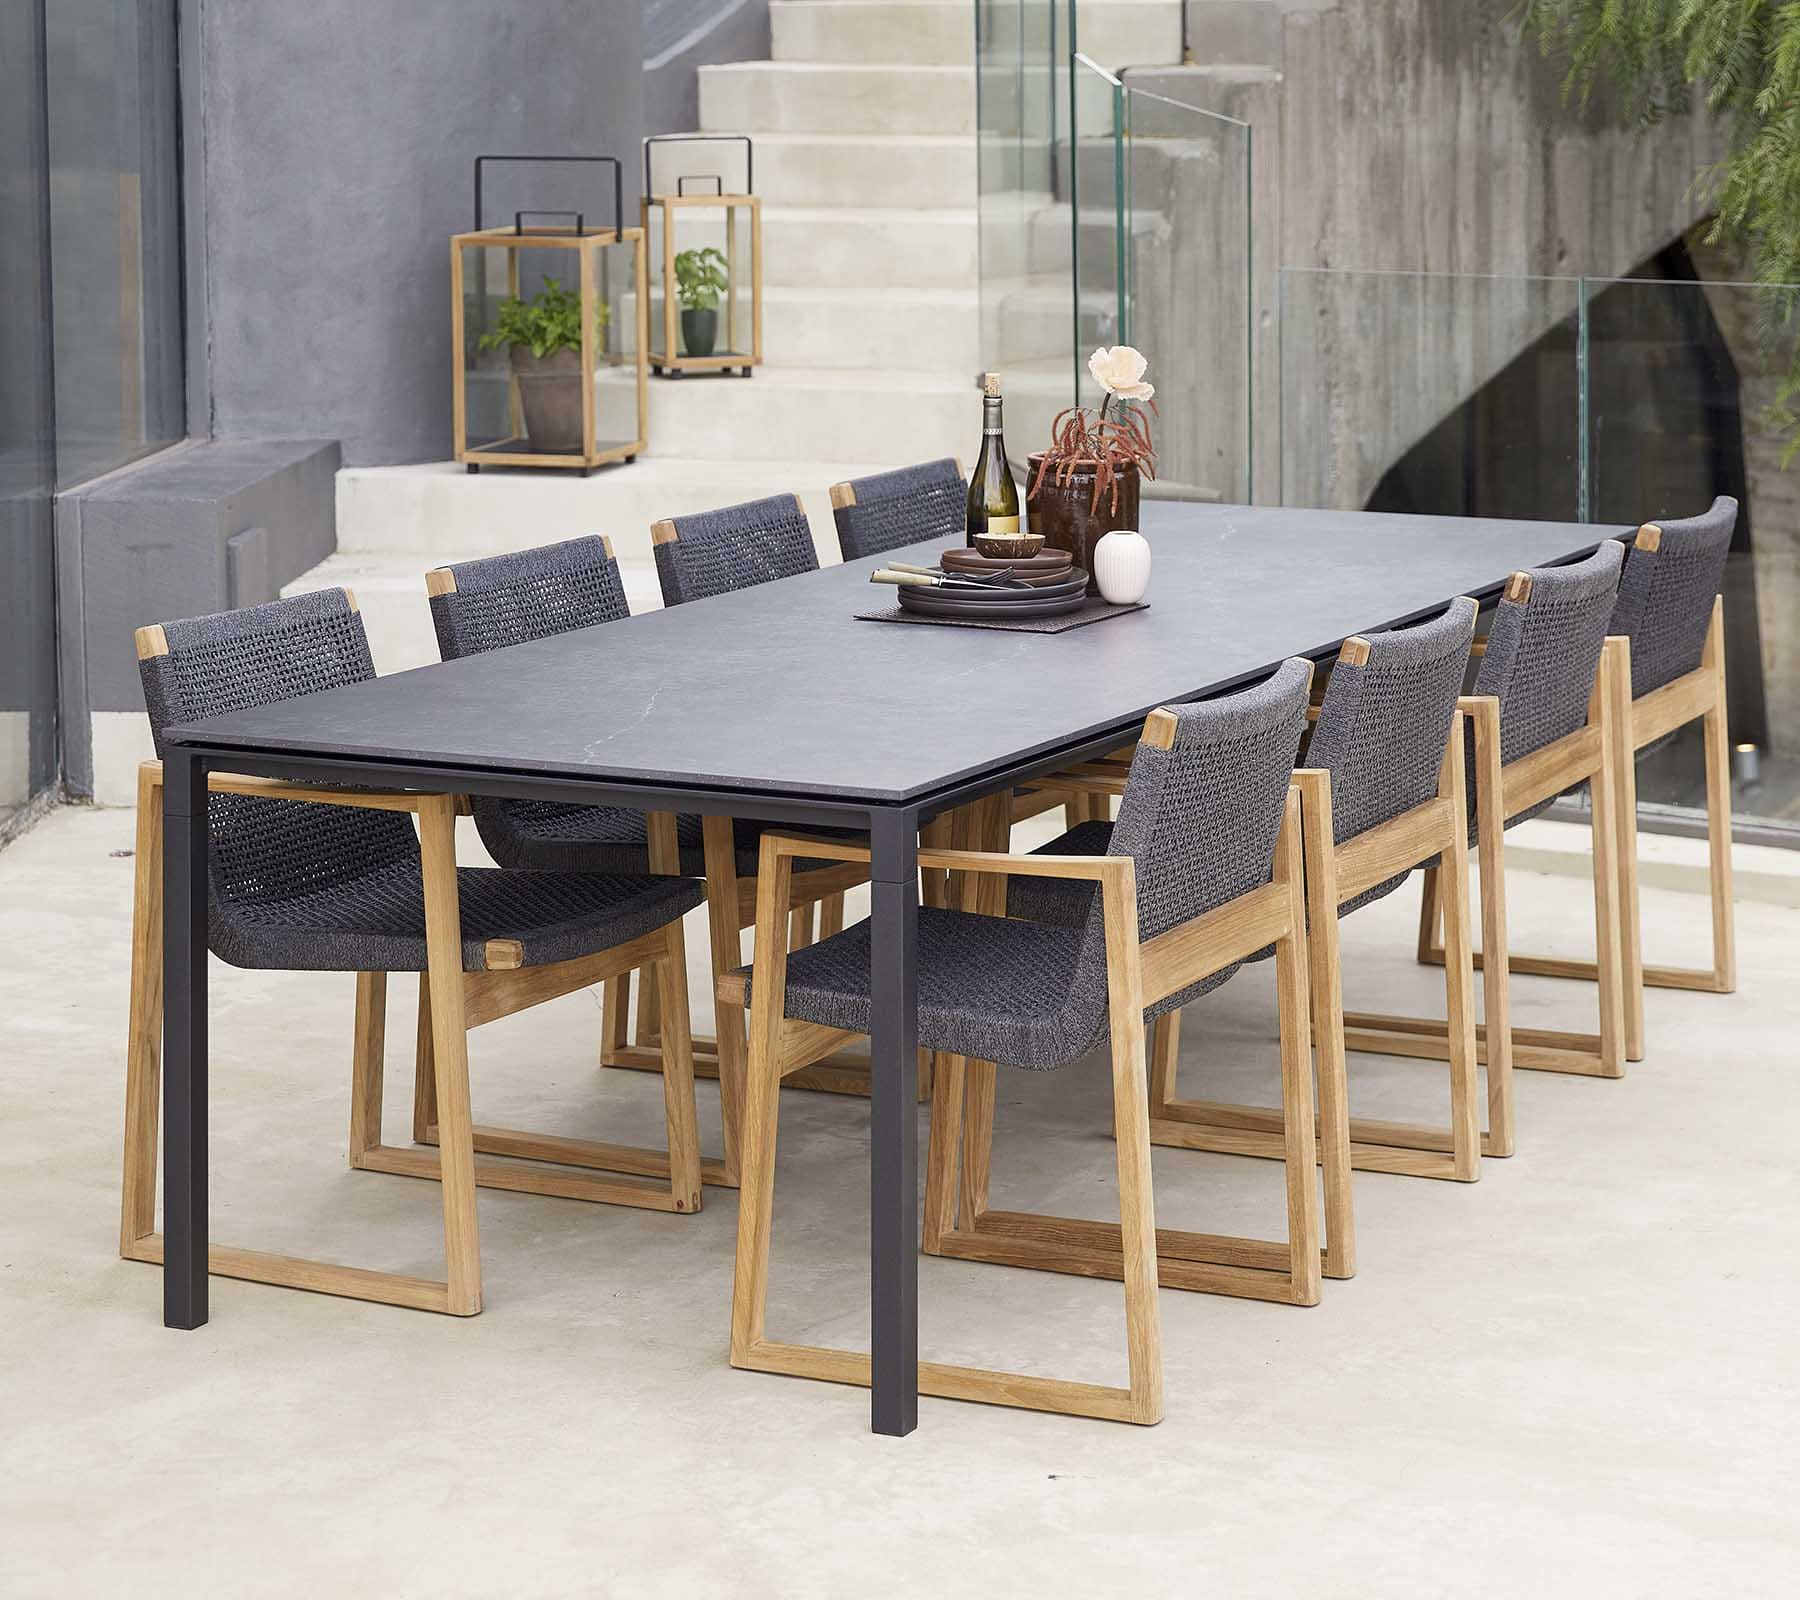 Boxhill's Pure dark grey aluminum outdoor dining table with teak dark grey dining chairs placed near the stairs